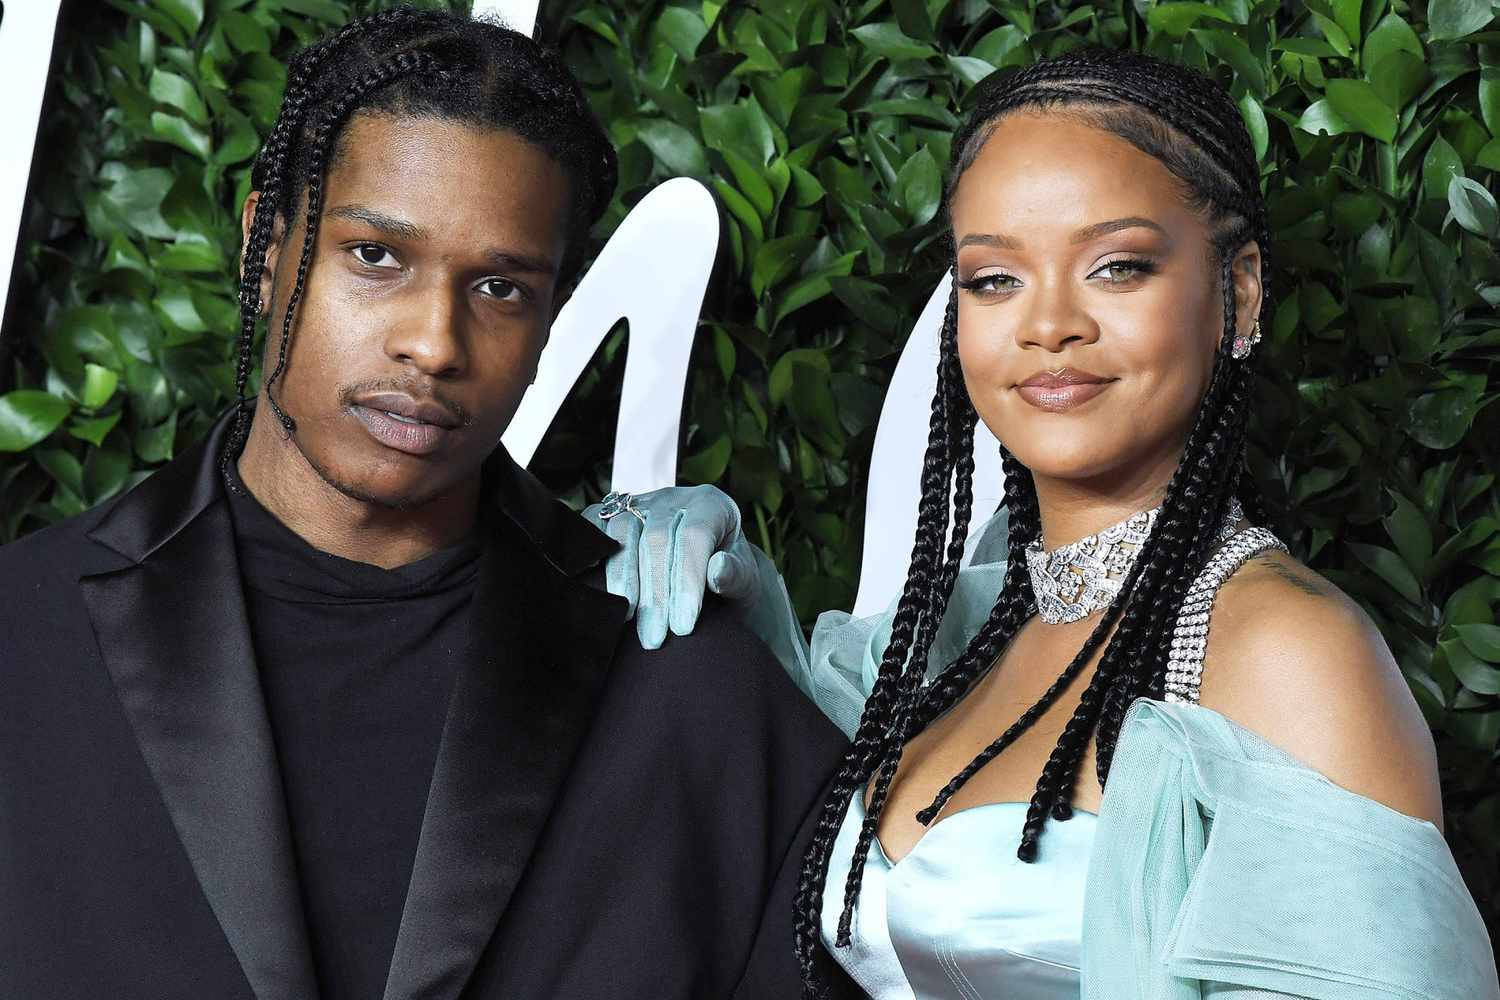 Rihanna and ASAP Rocky's son's name has been revealed. Details inside